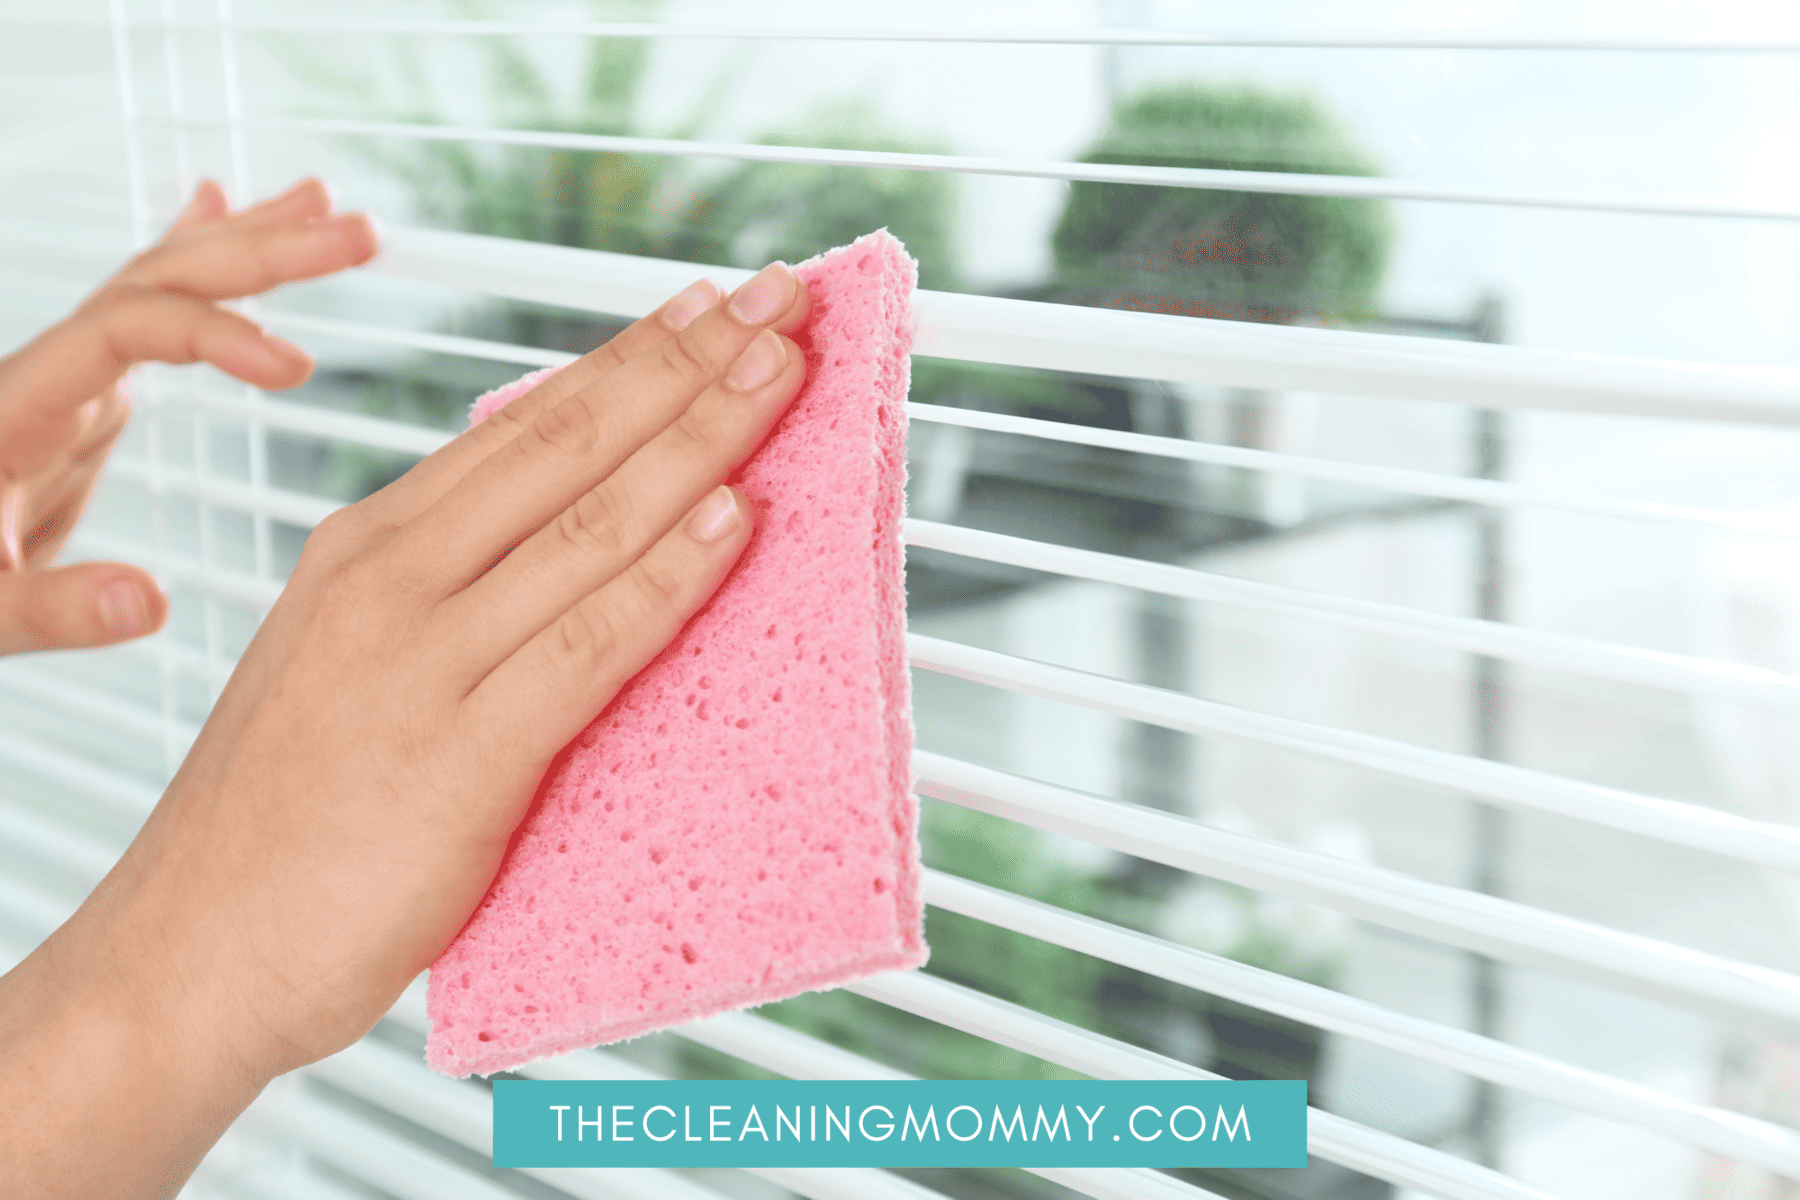 Woman dusting white blinds with pink microfiber cloth